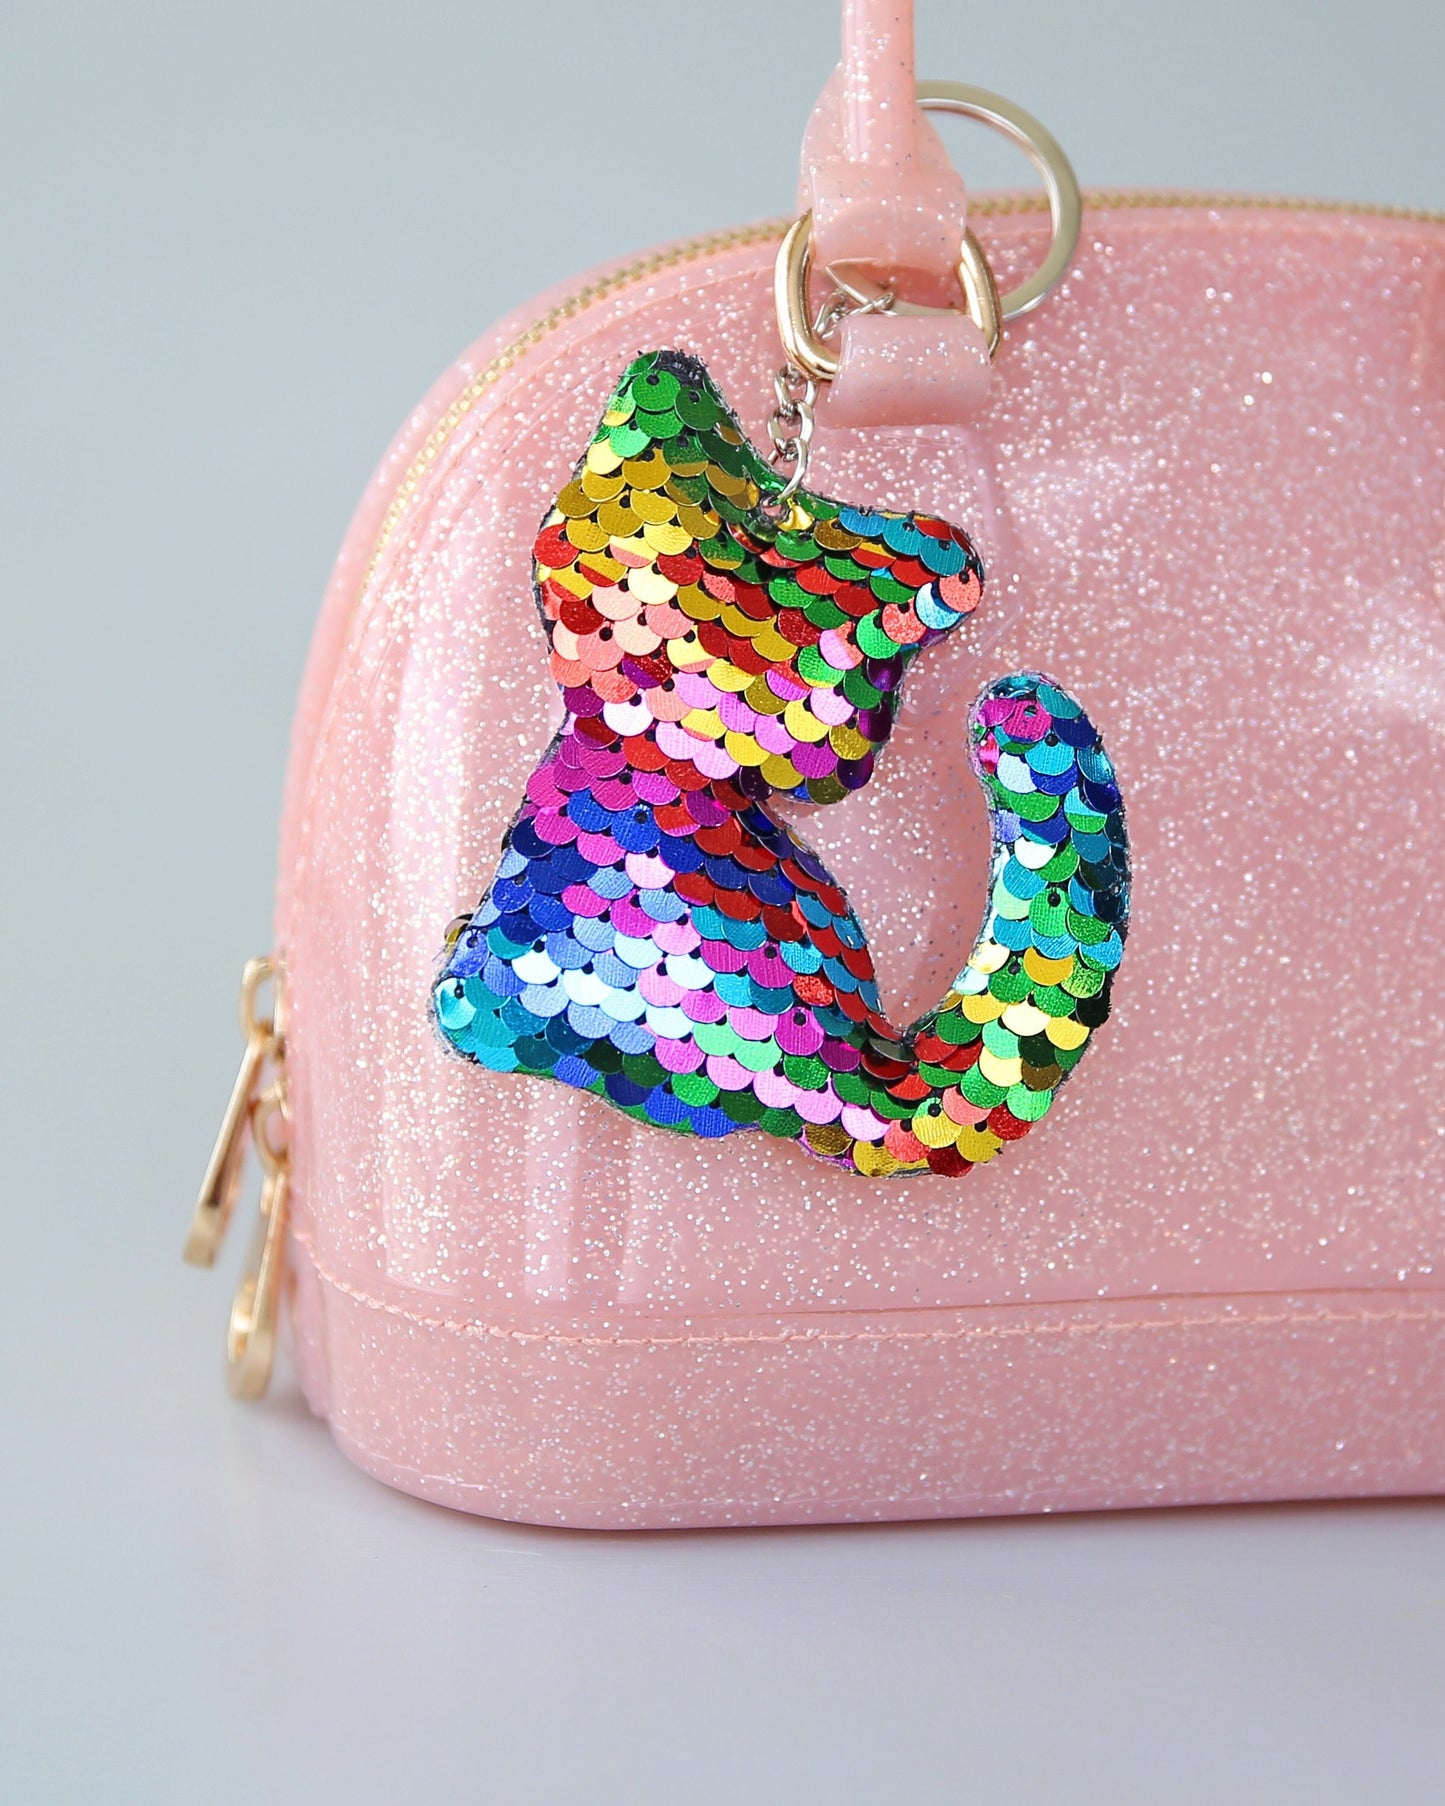 Rainbow Sequin Cat Keychain- Sequin Keychain, backpack charm, cat, party favor, gift for her, stocking stuffer, birthday gift, kitten